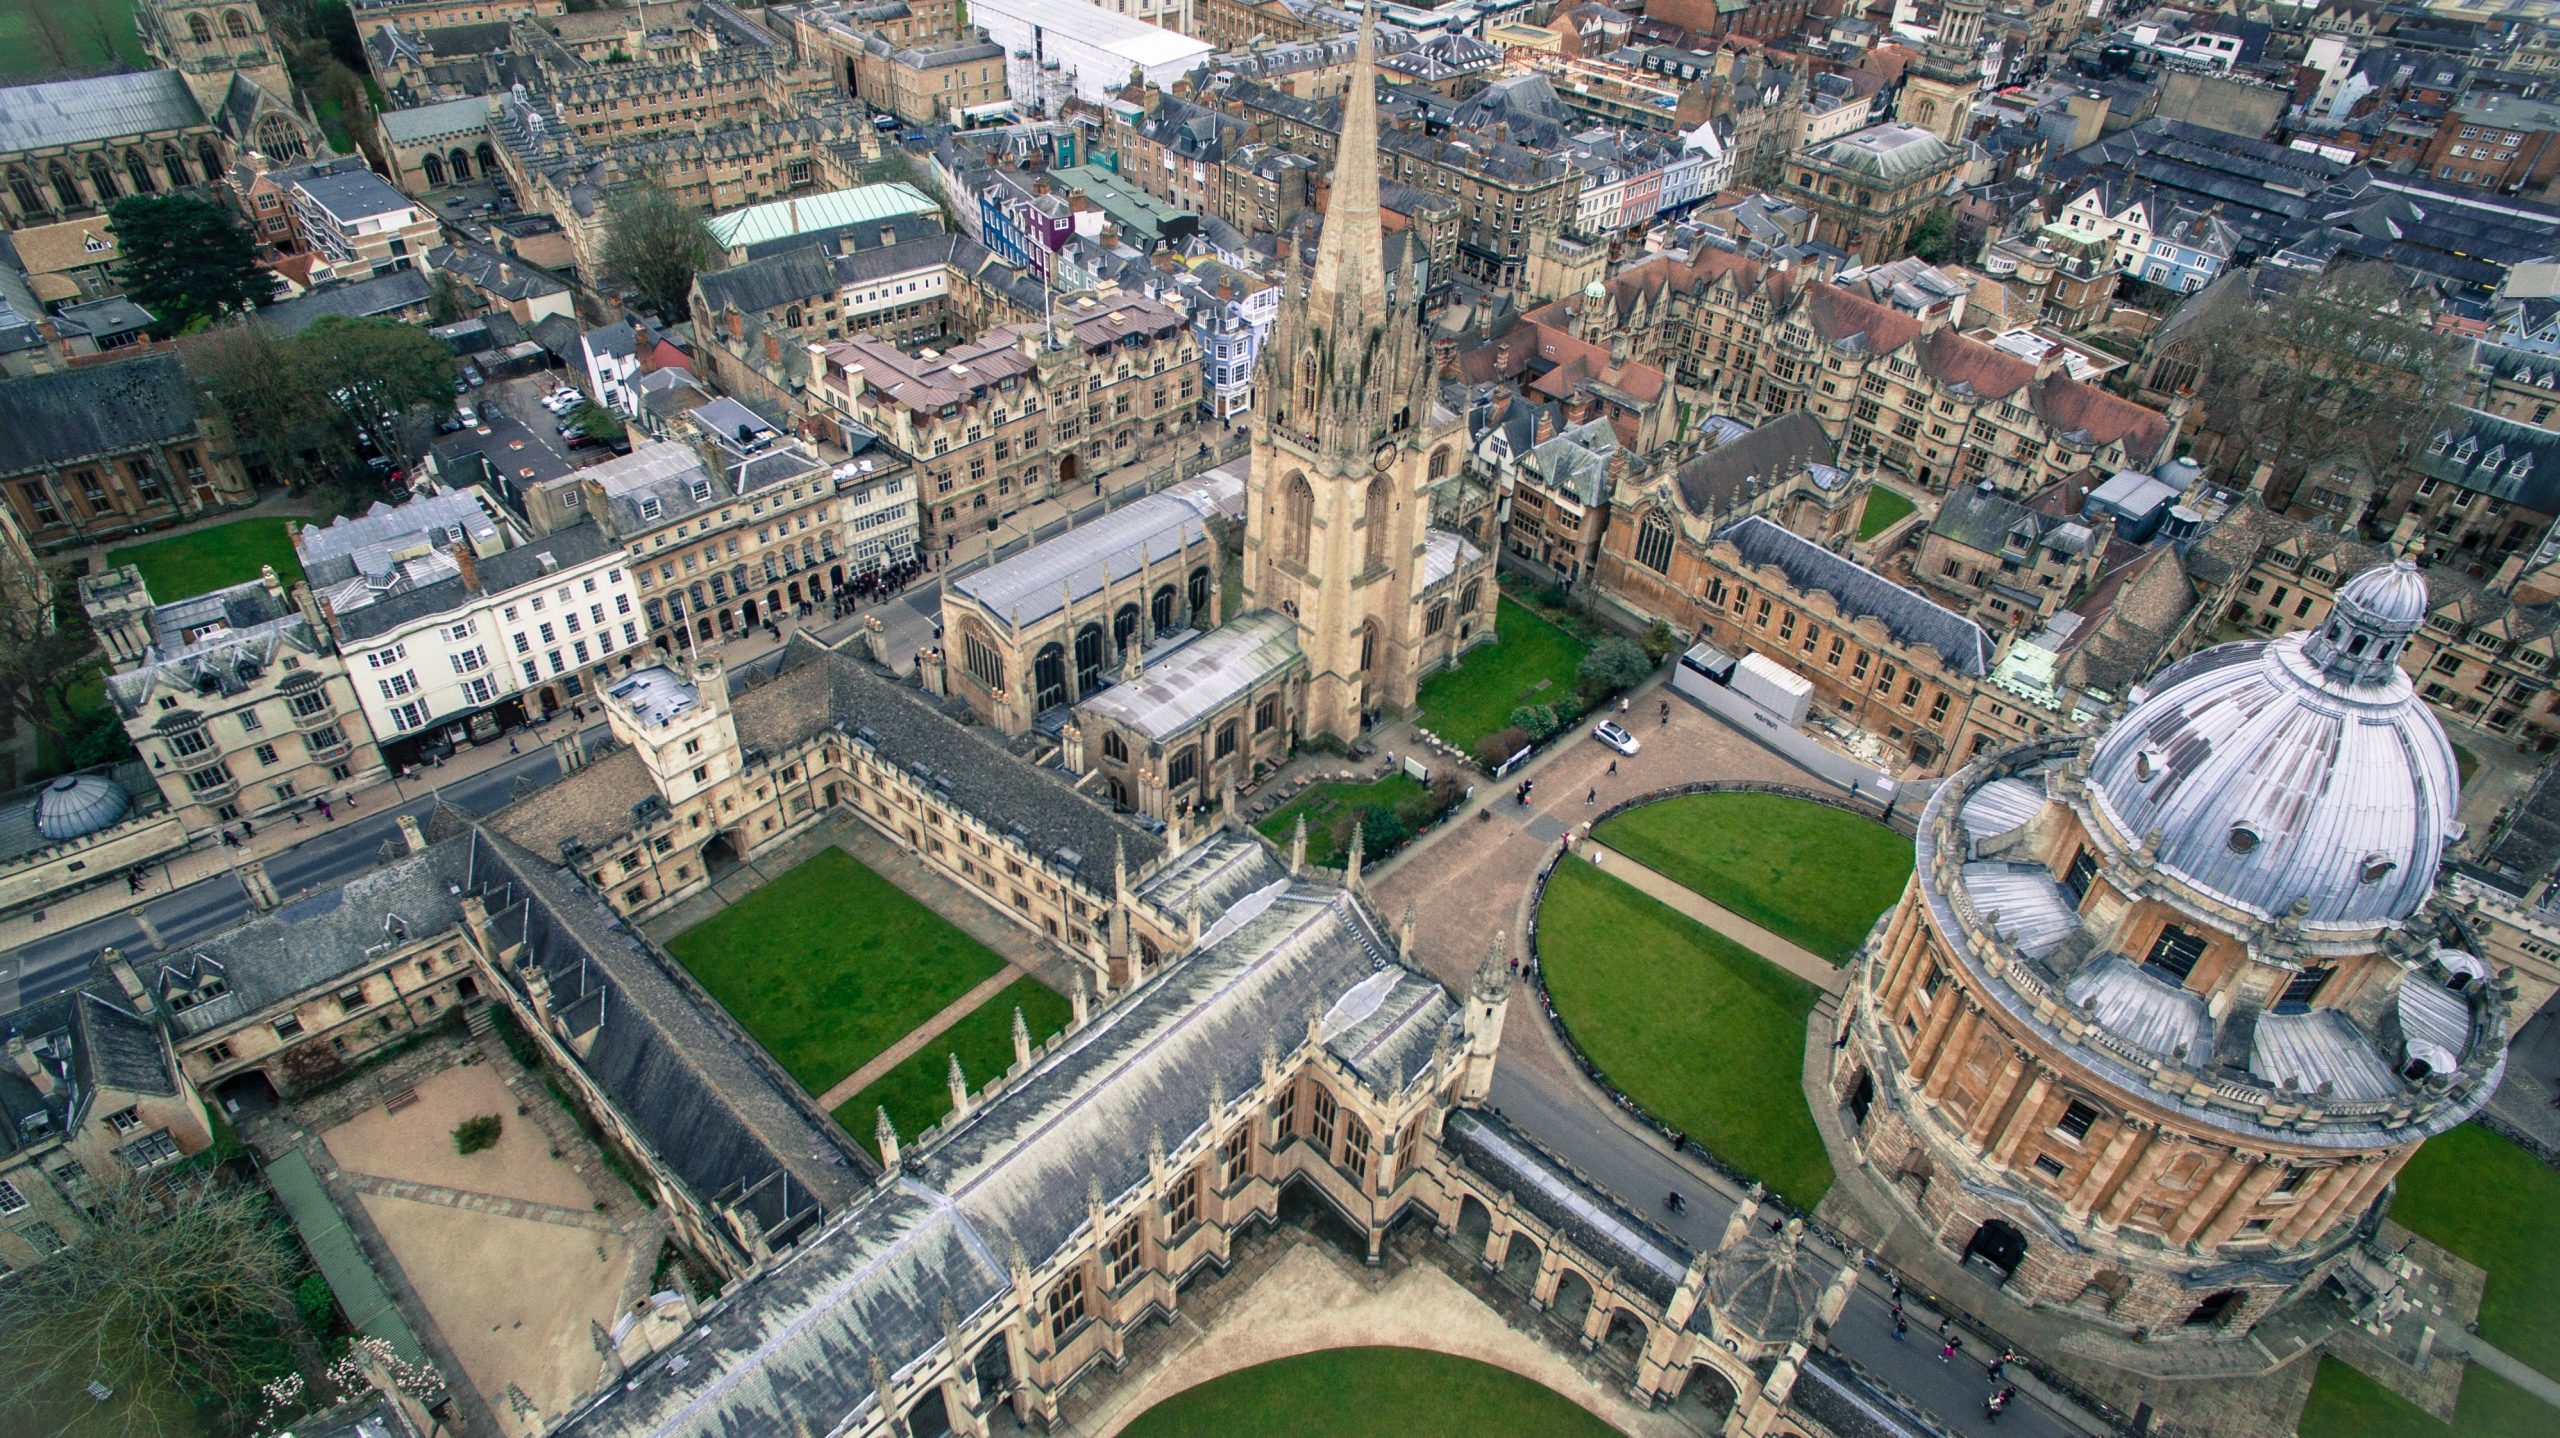 An aerial shot shows Oxford University campus